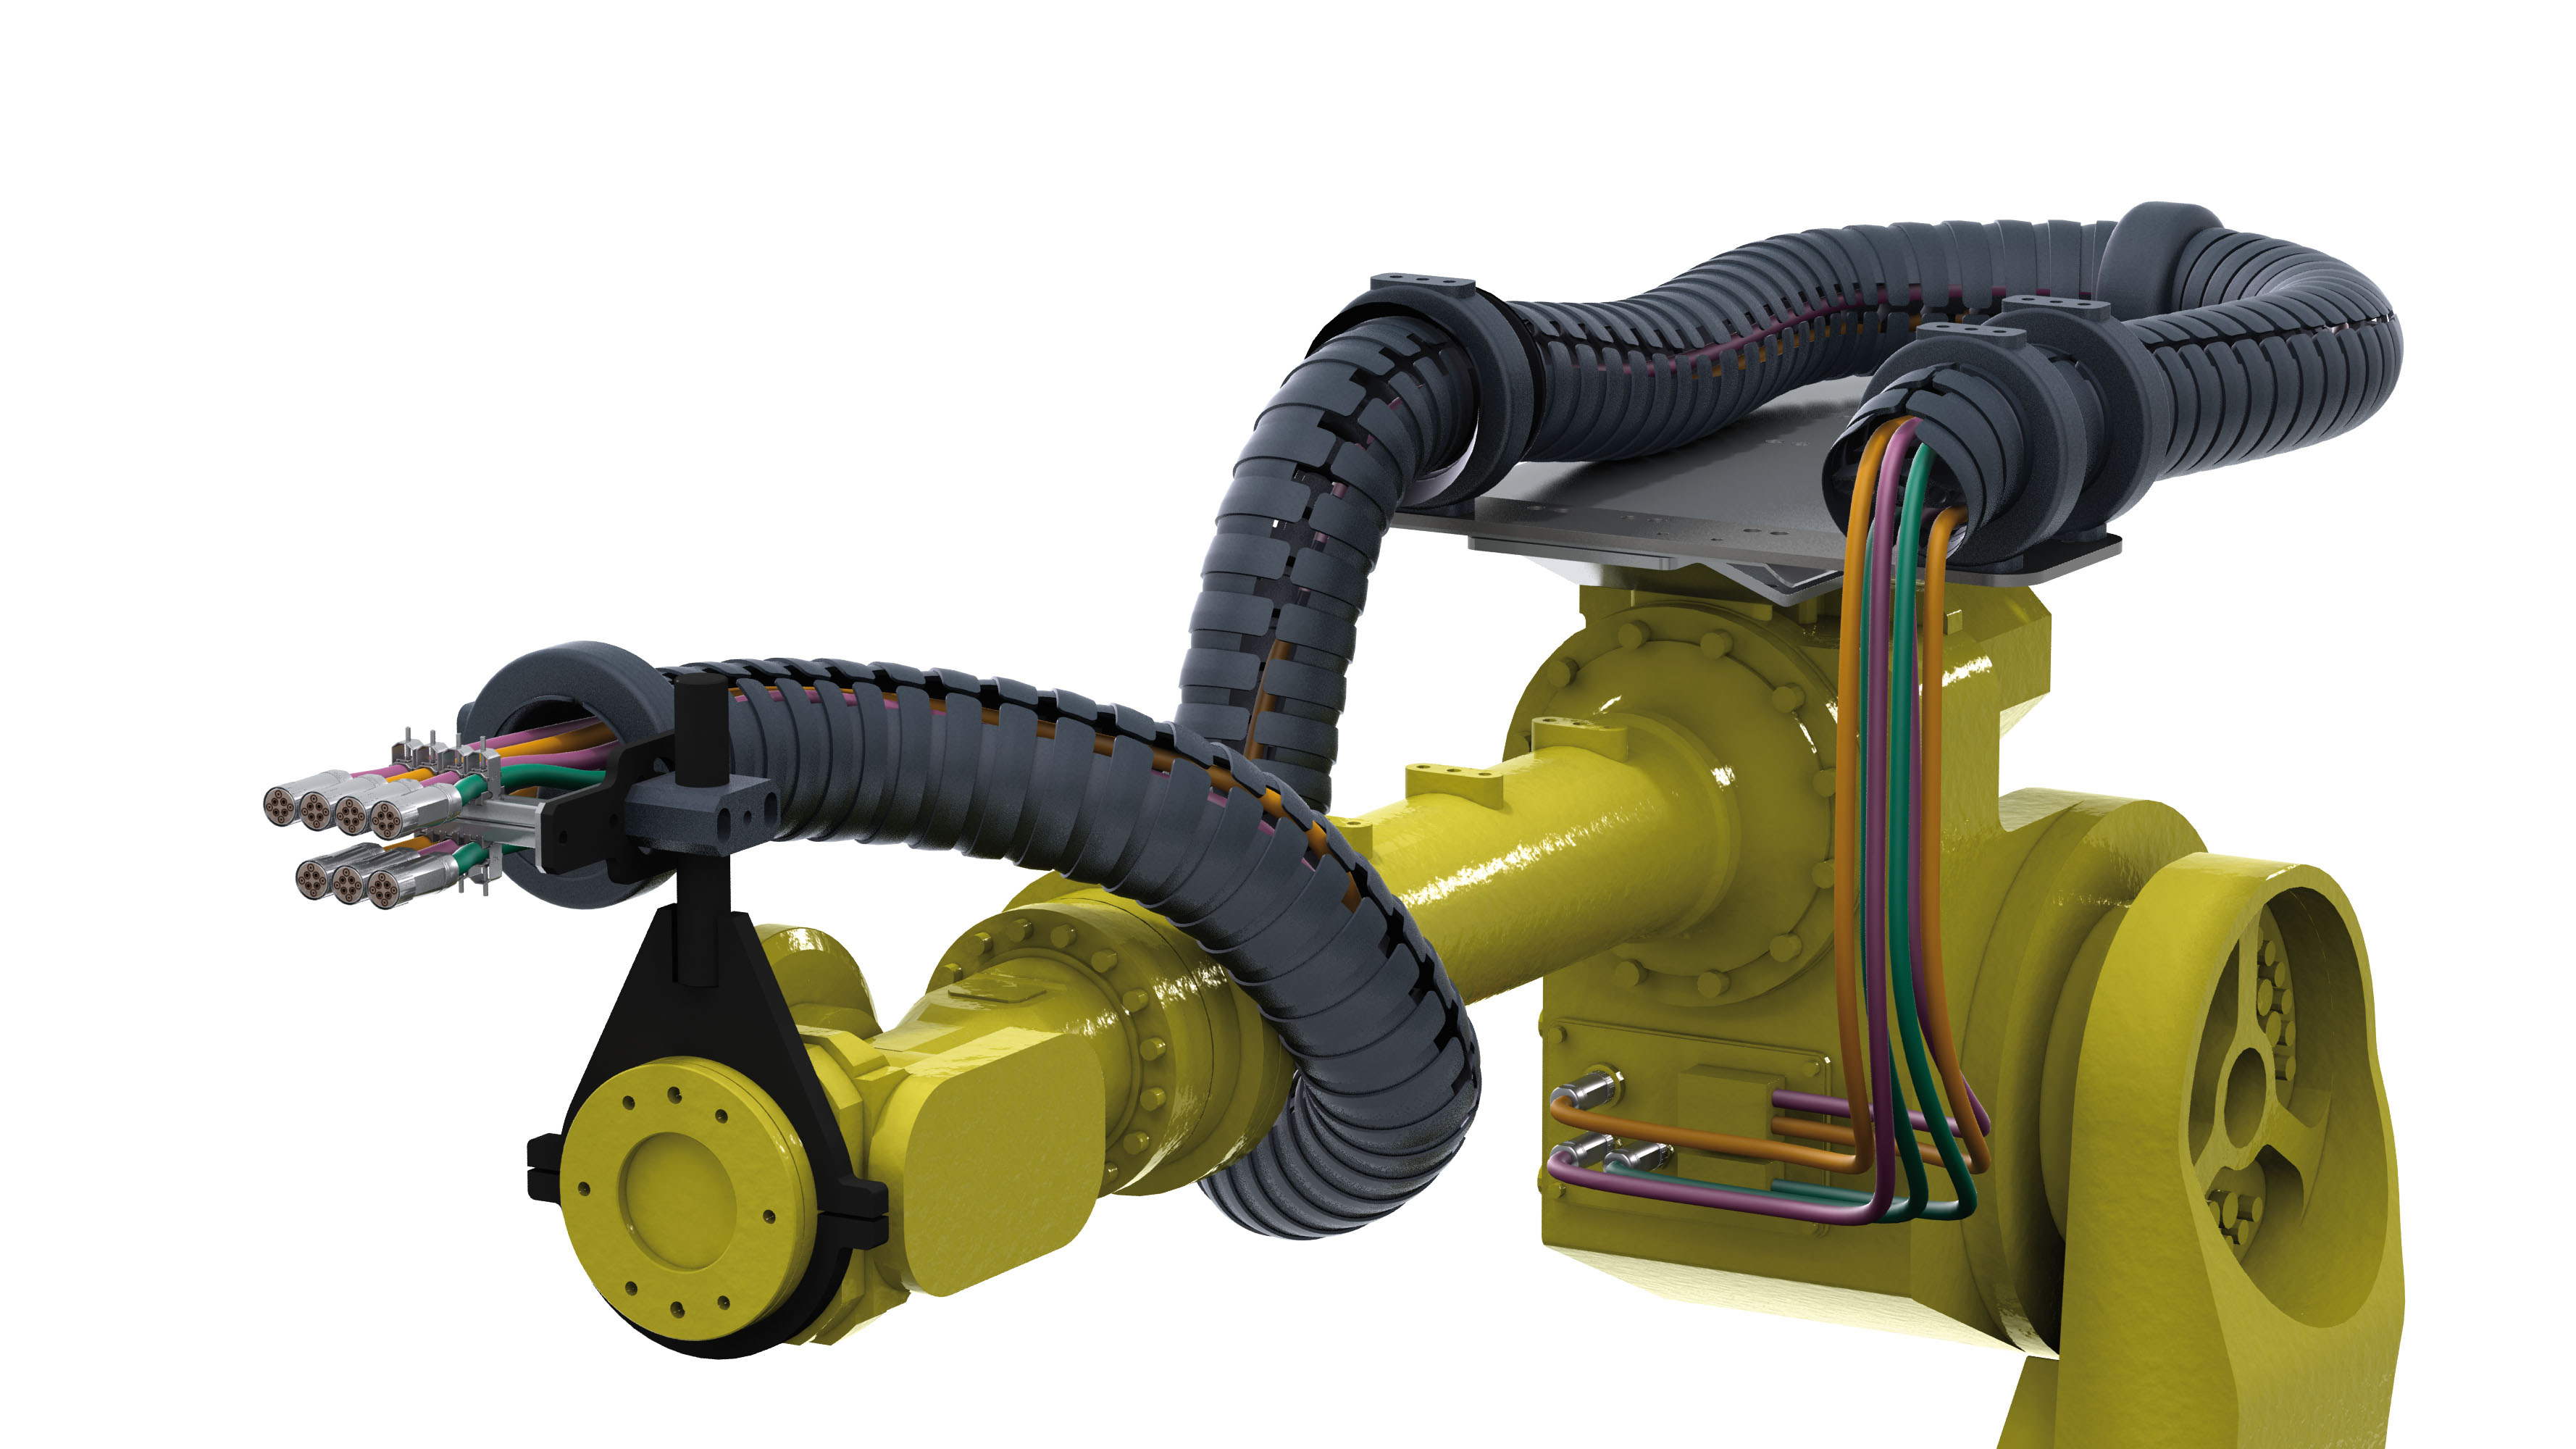 Cables on robotic arms must have high tensile strength, abrasion and flammability resistance. Photo courtesy igus.